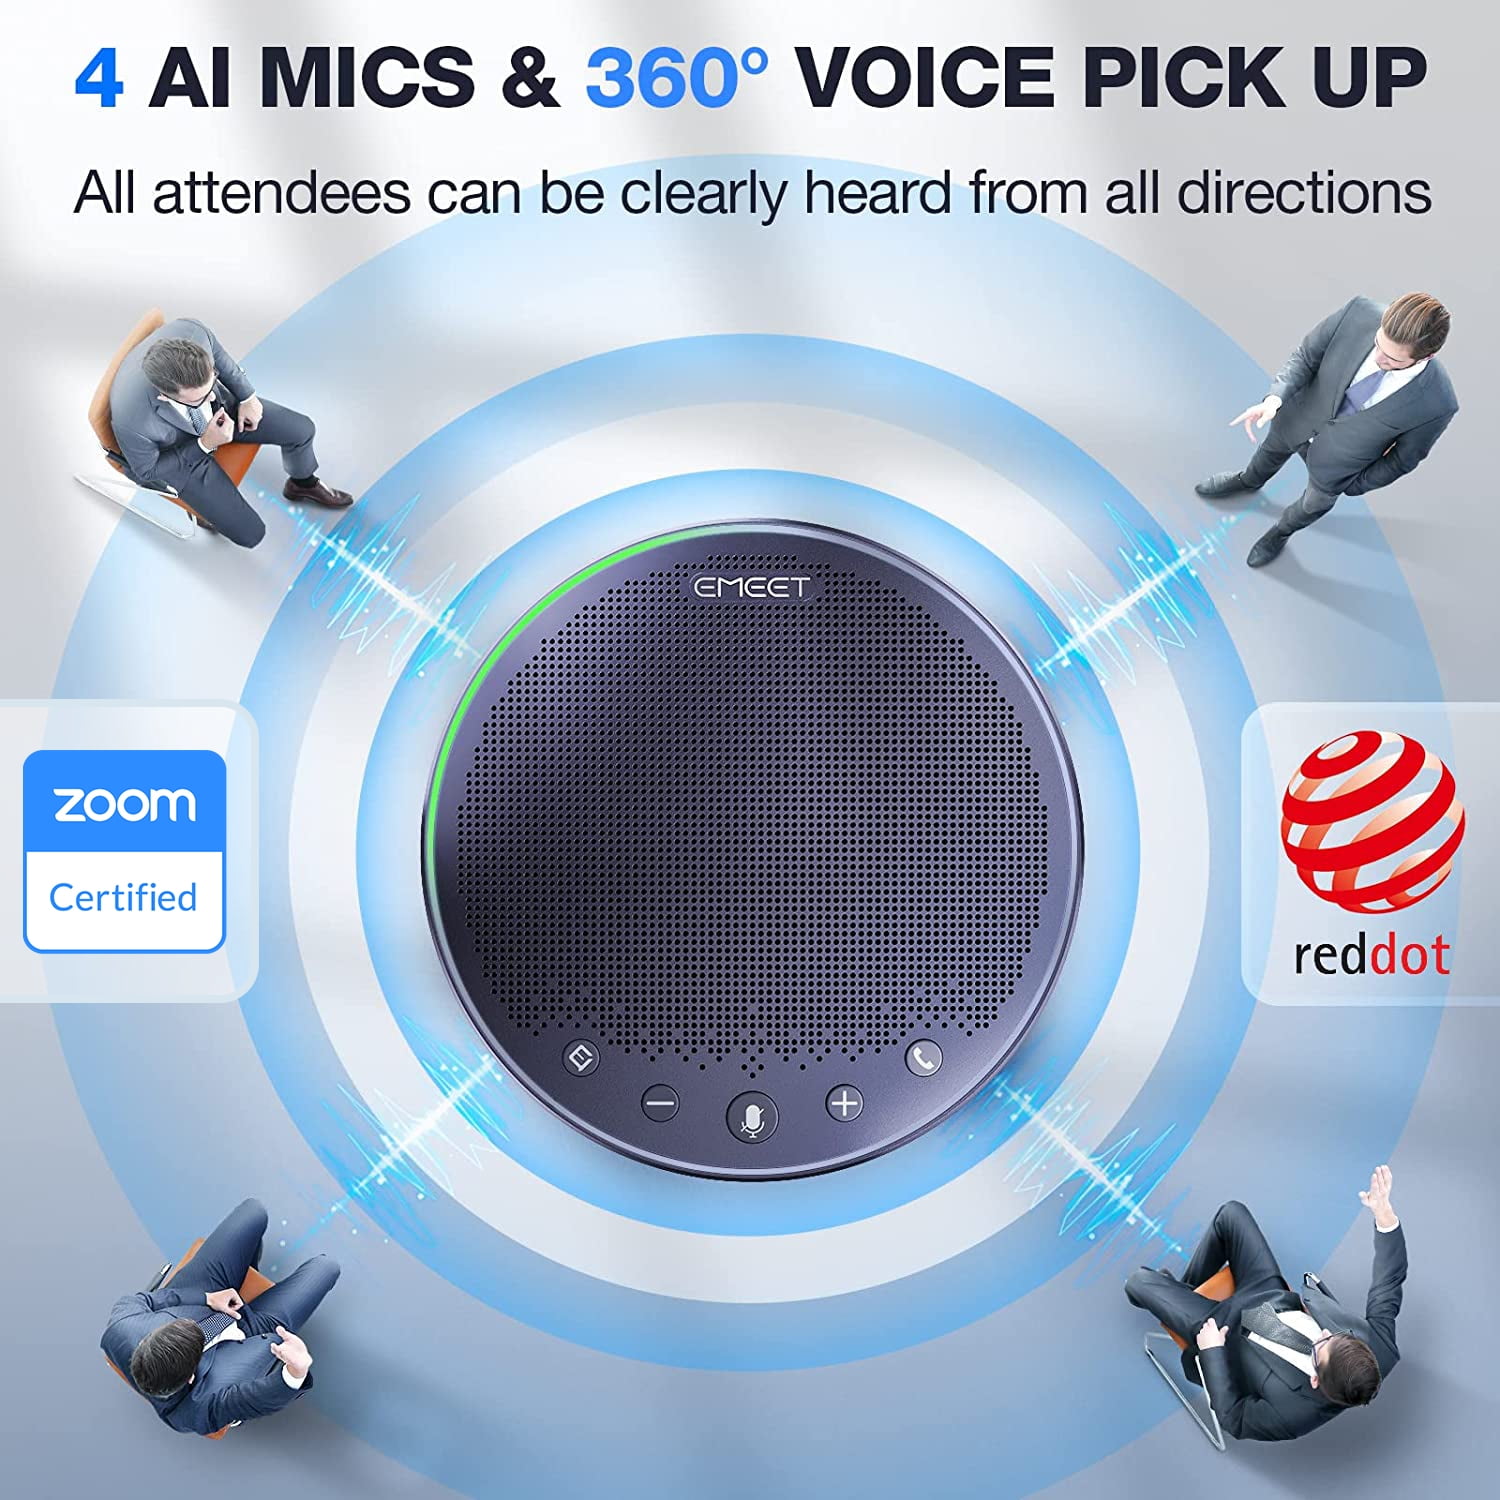 Bluetooth Business Gray, EMEET Speakerphone M2 Conference Conference Portable Speakers for